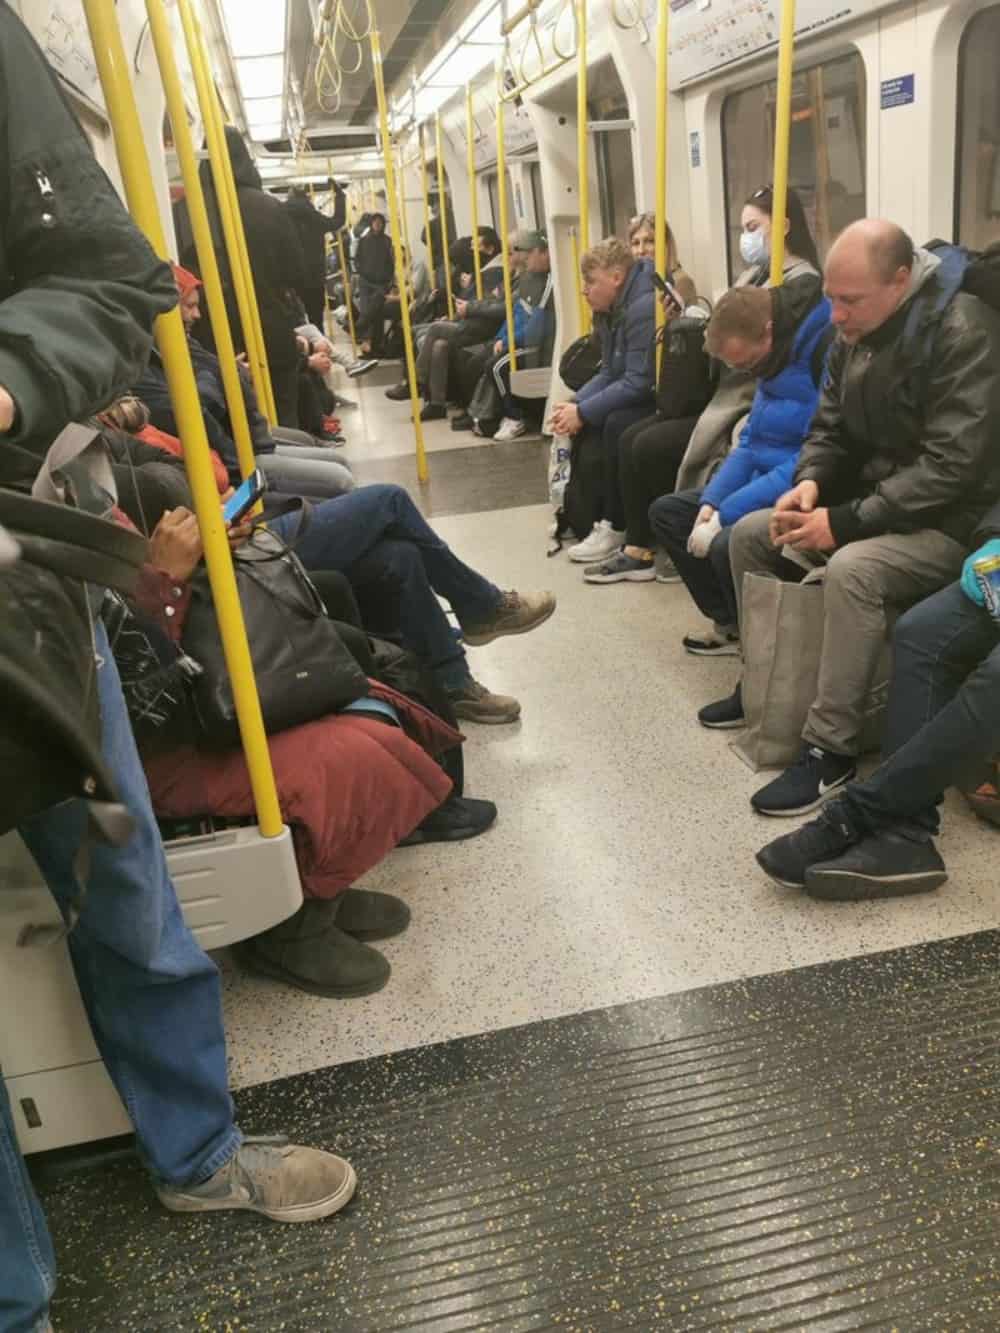 TfL workers “dropping like flies” as overcrowding persists